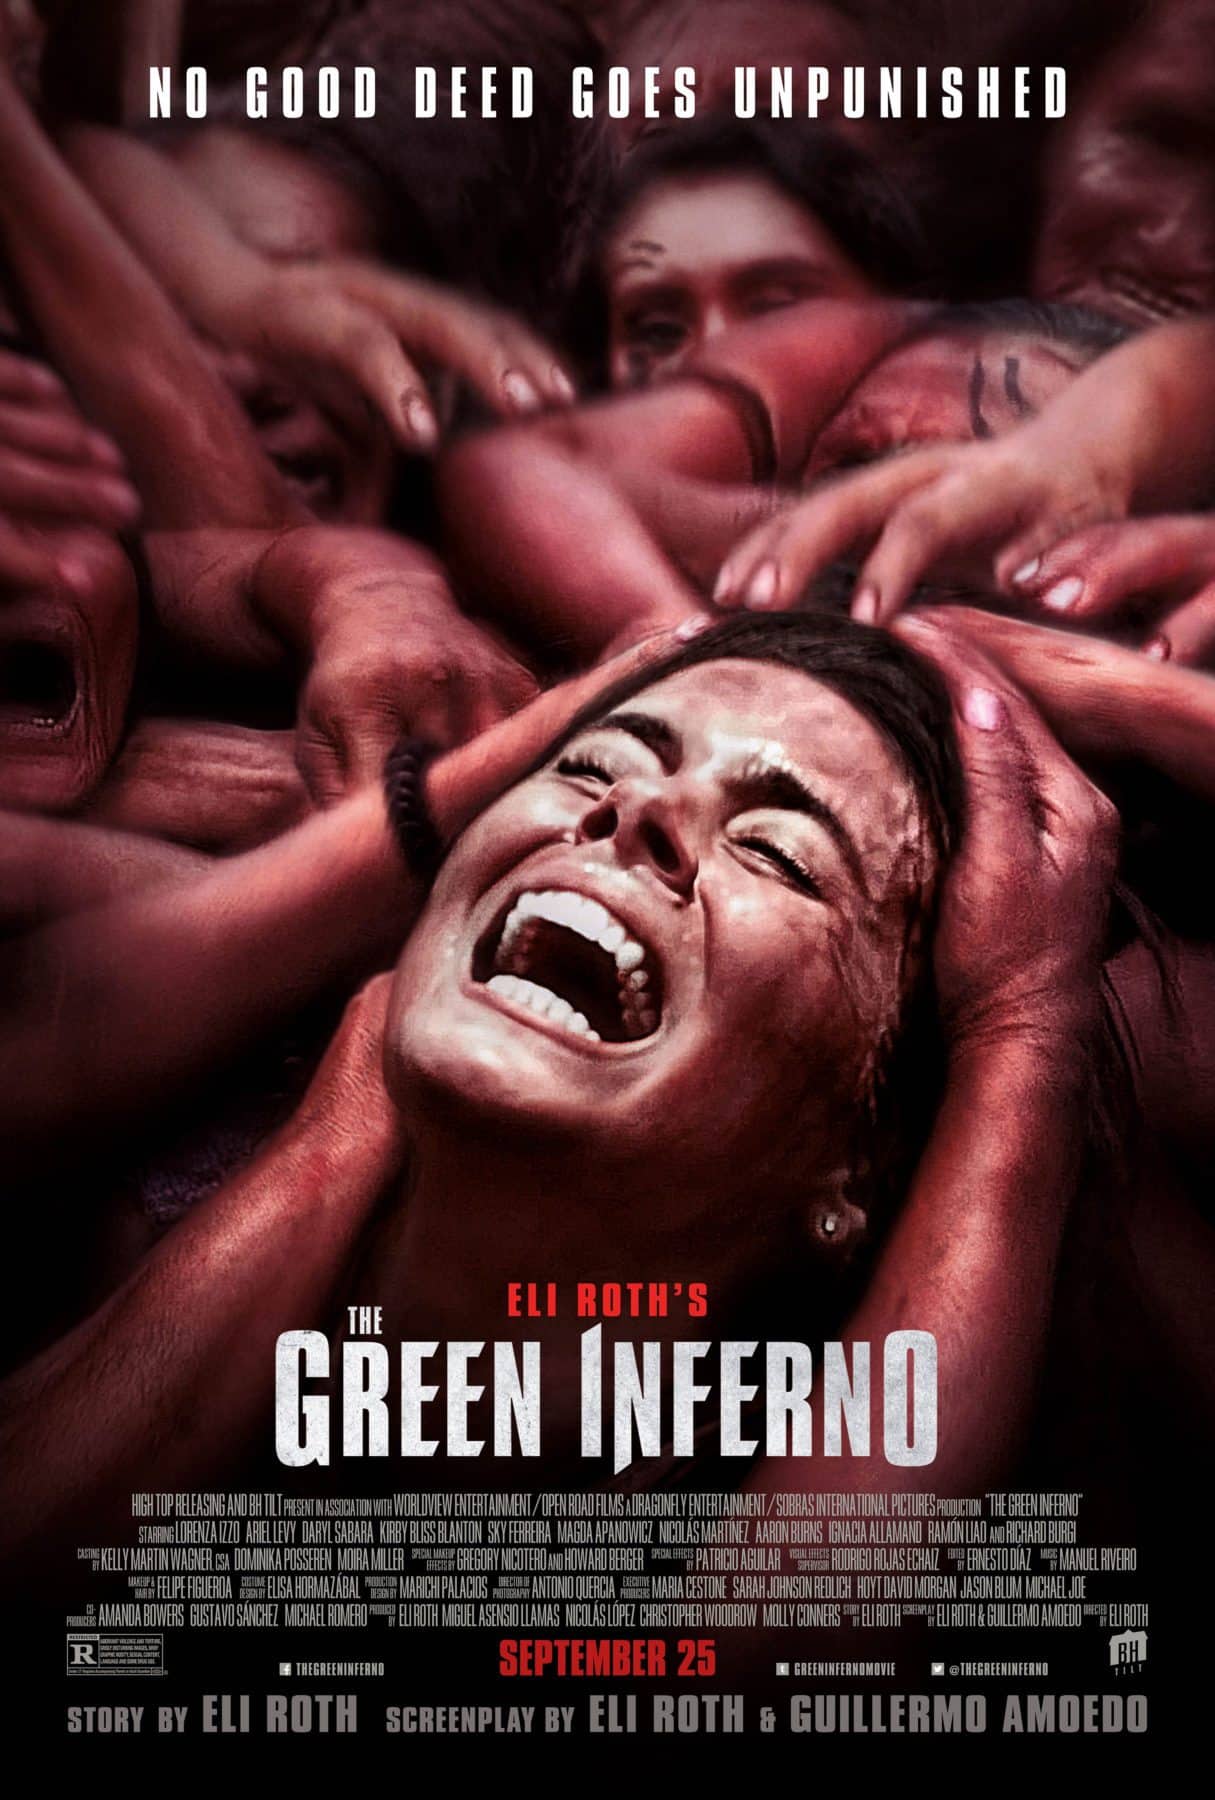 Horror Movie Review: The Green Inferno (2015)